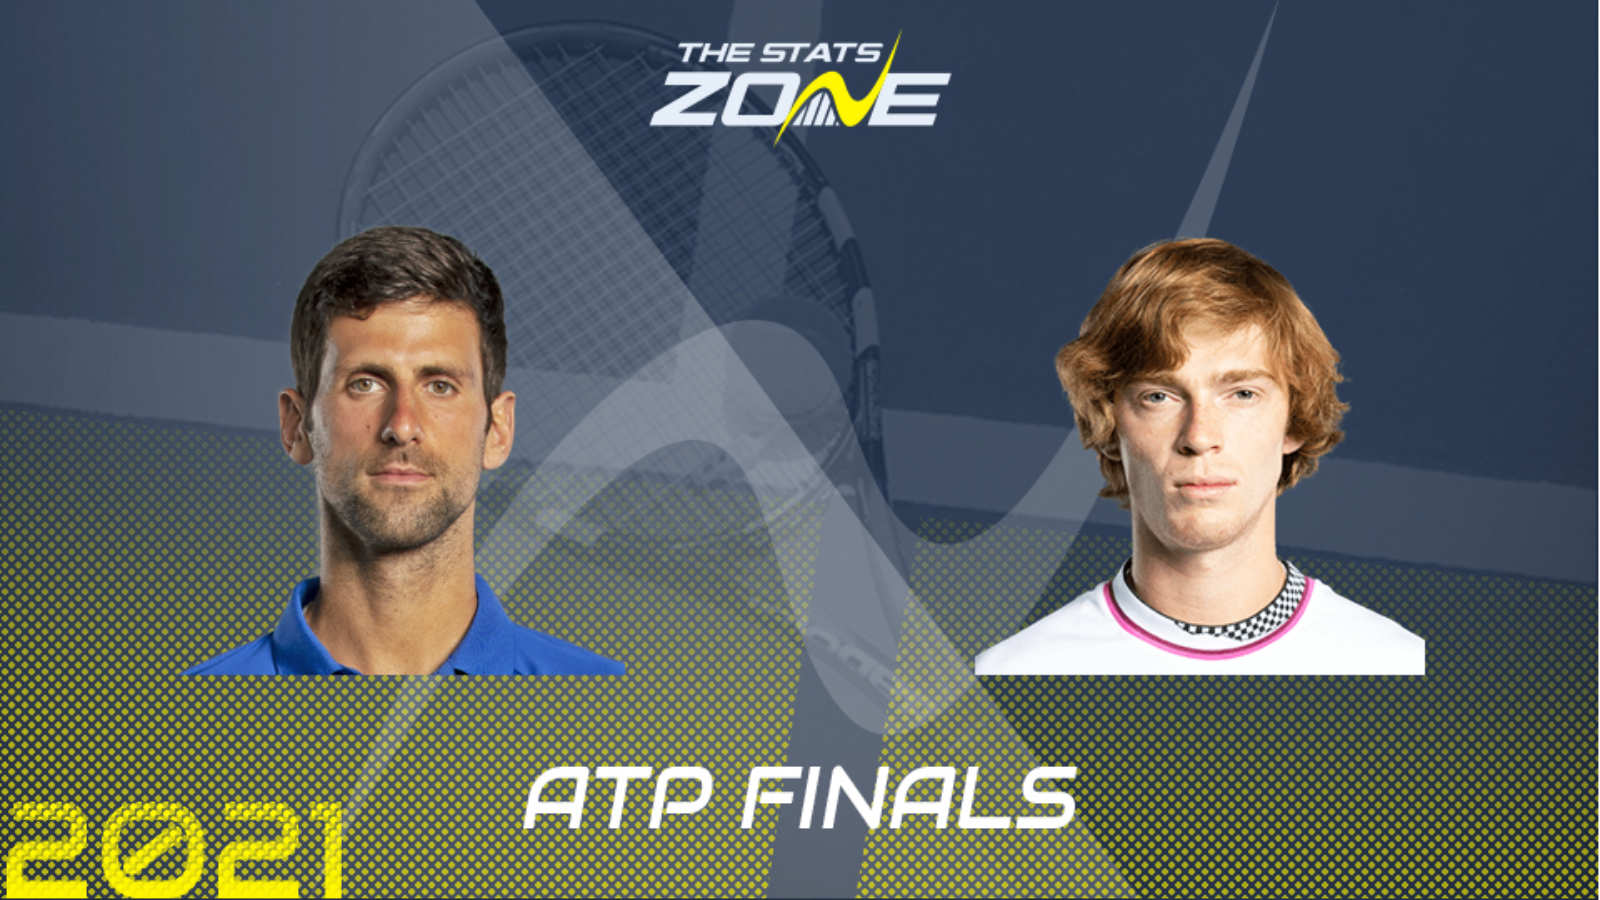 2021 Nitto ATP Finals – Group Stage